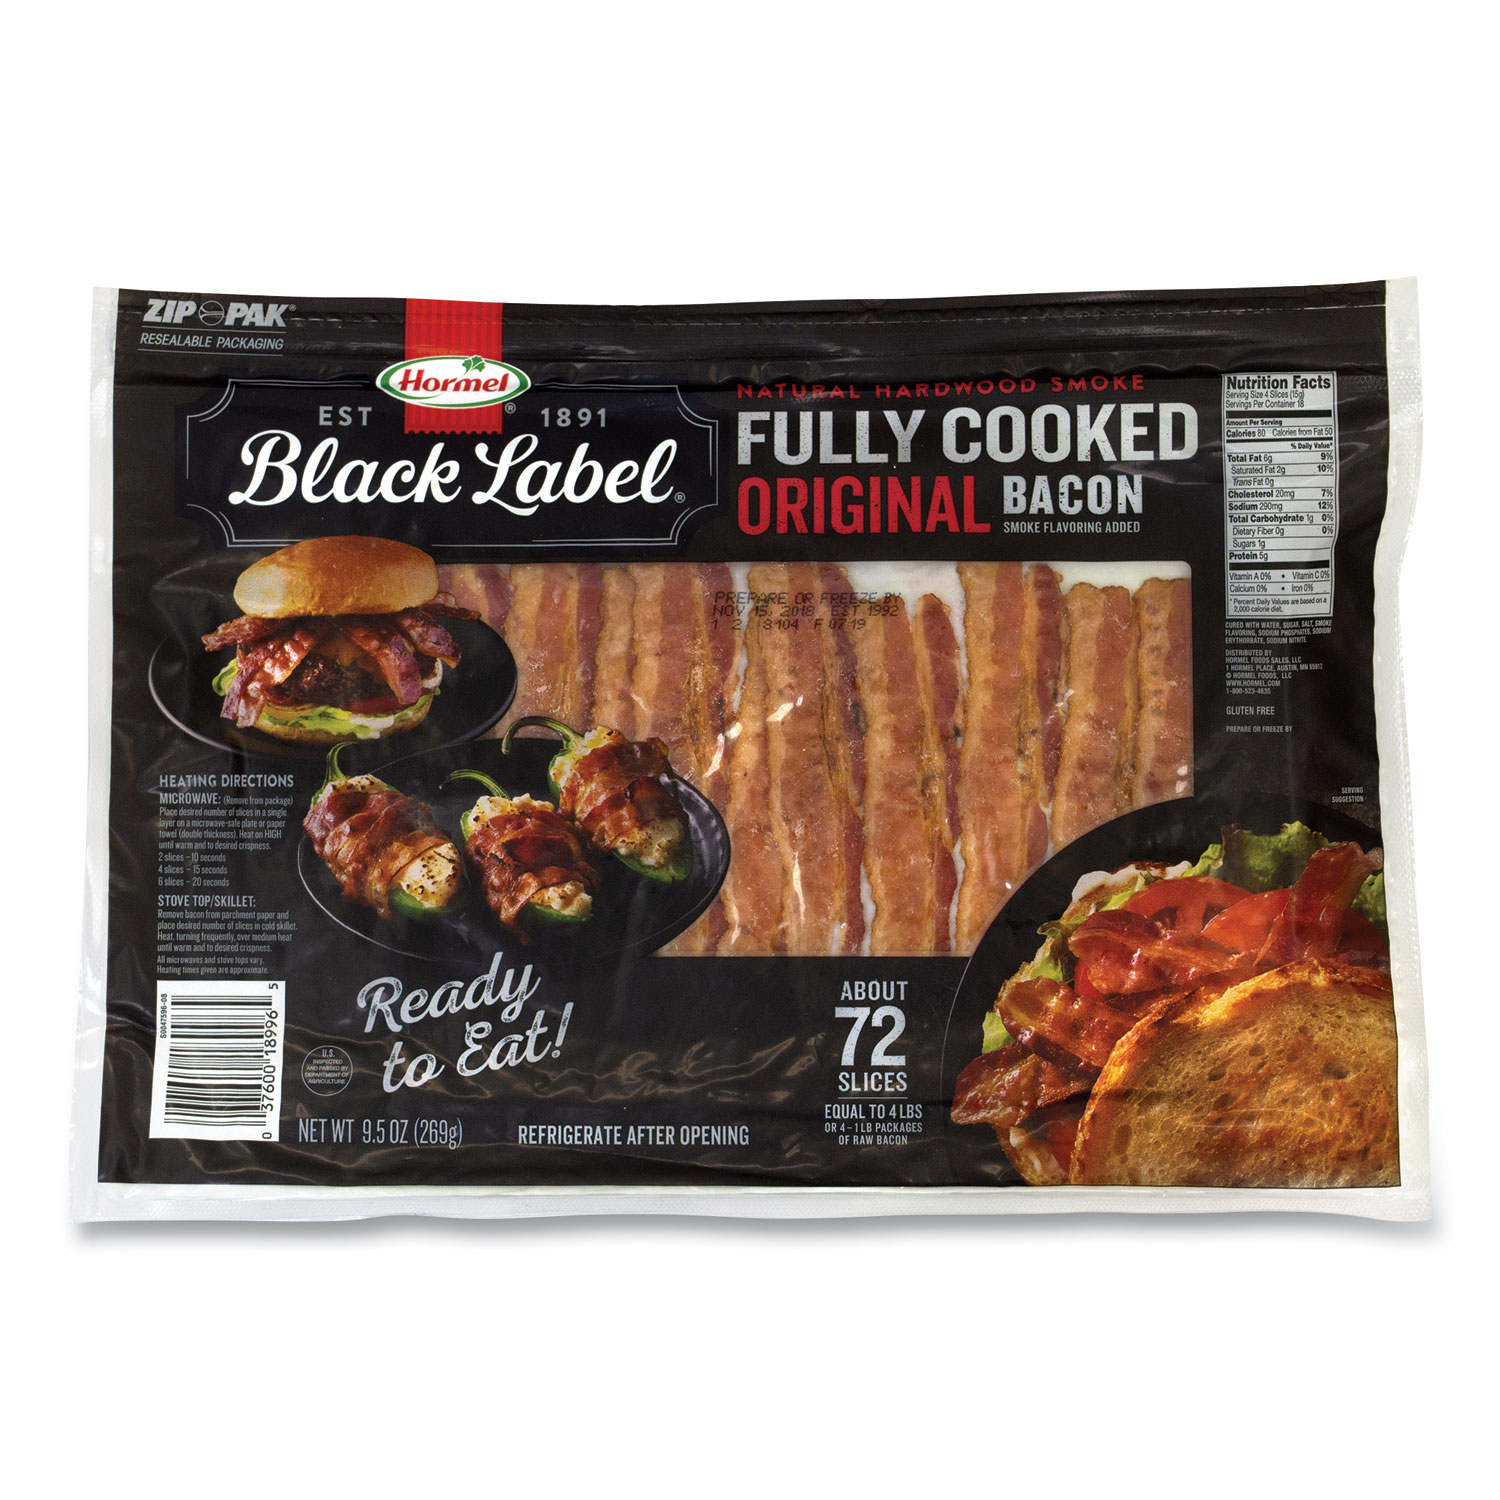  Hormel Black Label 189965 Fully Cooked Bacon, Original, 9.5 oz Package, Approximately 72 Slices/Pack, Free Delivery in 1-4 Business Days (GRR90200109) 